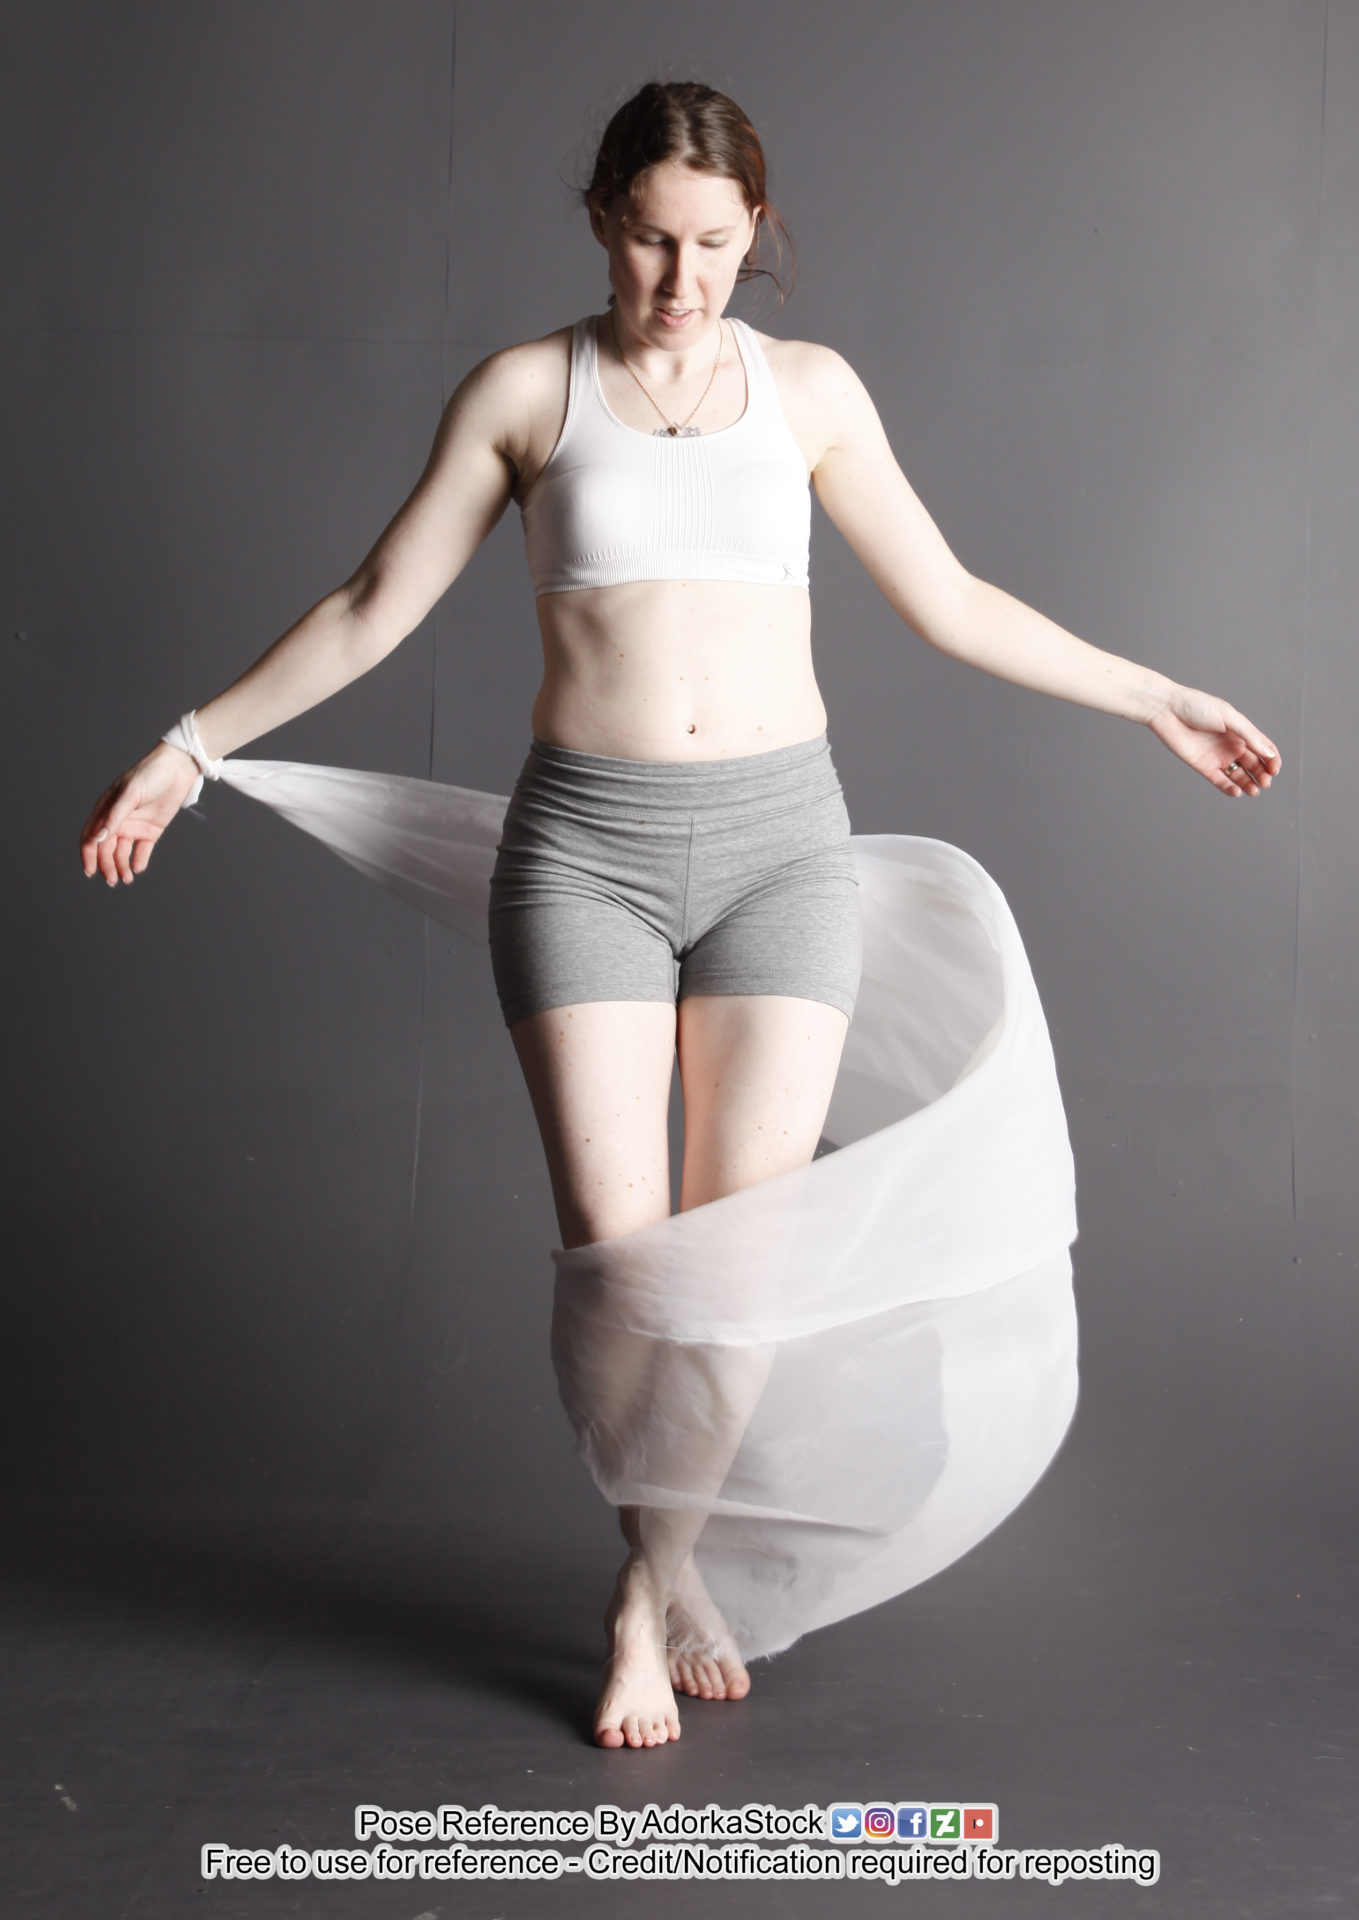 White, fit, female model with legs together and arms out, there's a loose white fabric wrapping from her wrist and down around her legs